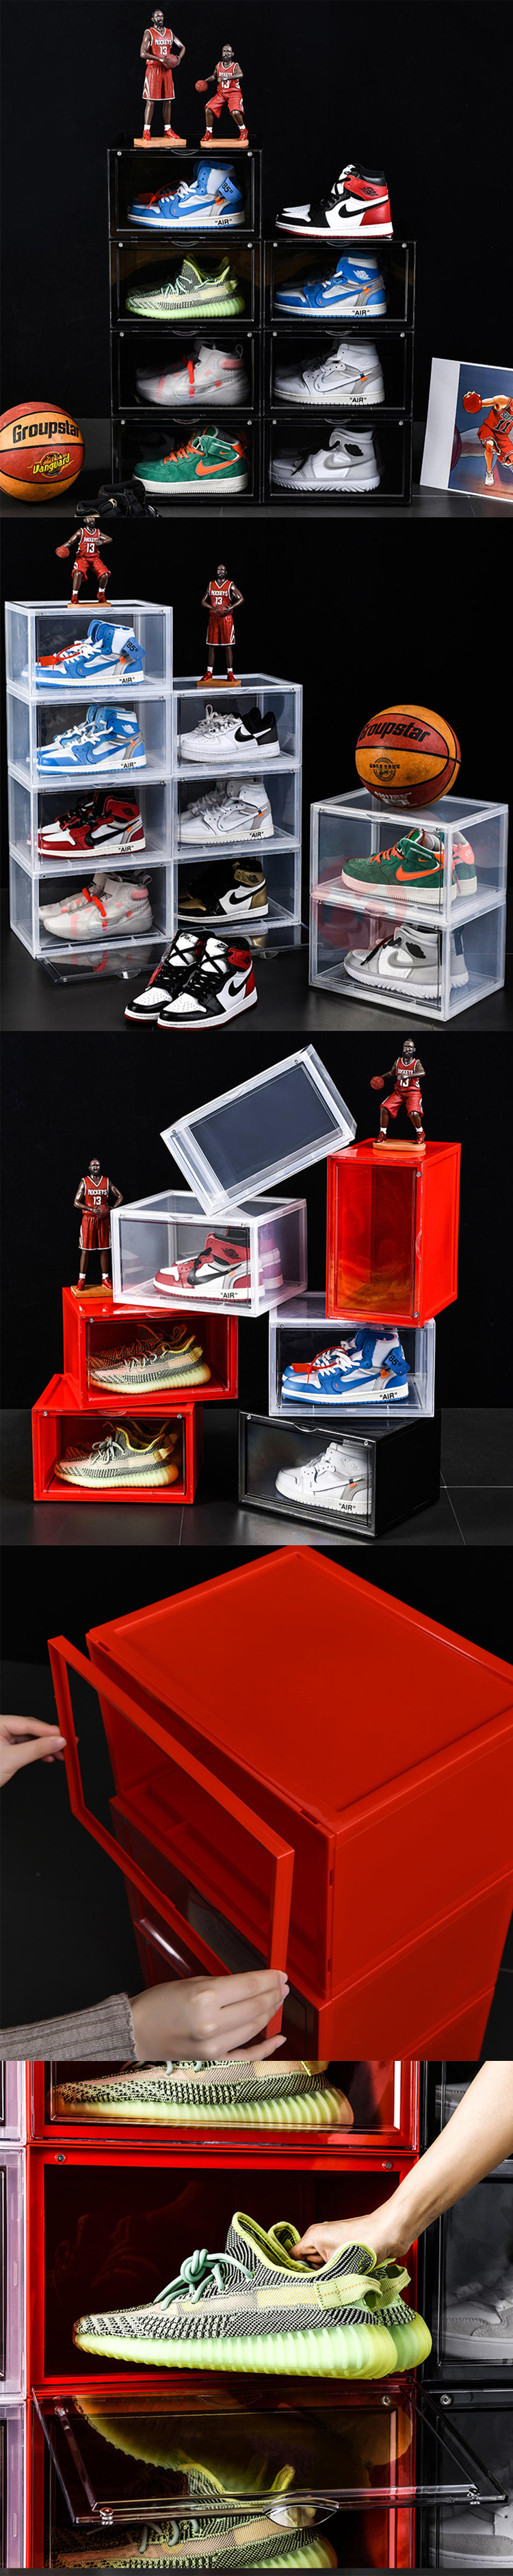 Shoe organizer storage box clear stackable container for shoes with side opening megnetic door display case